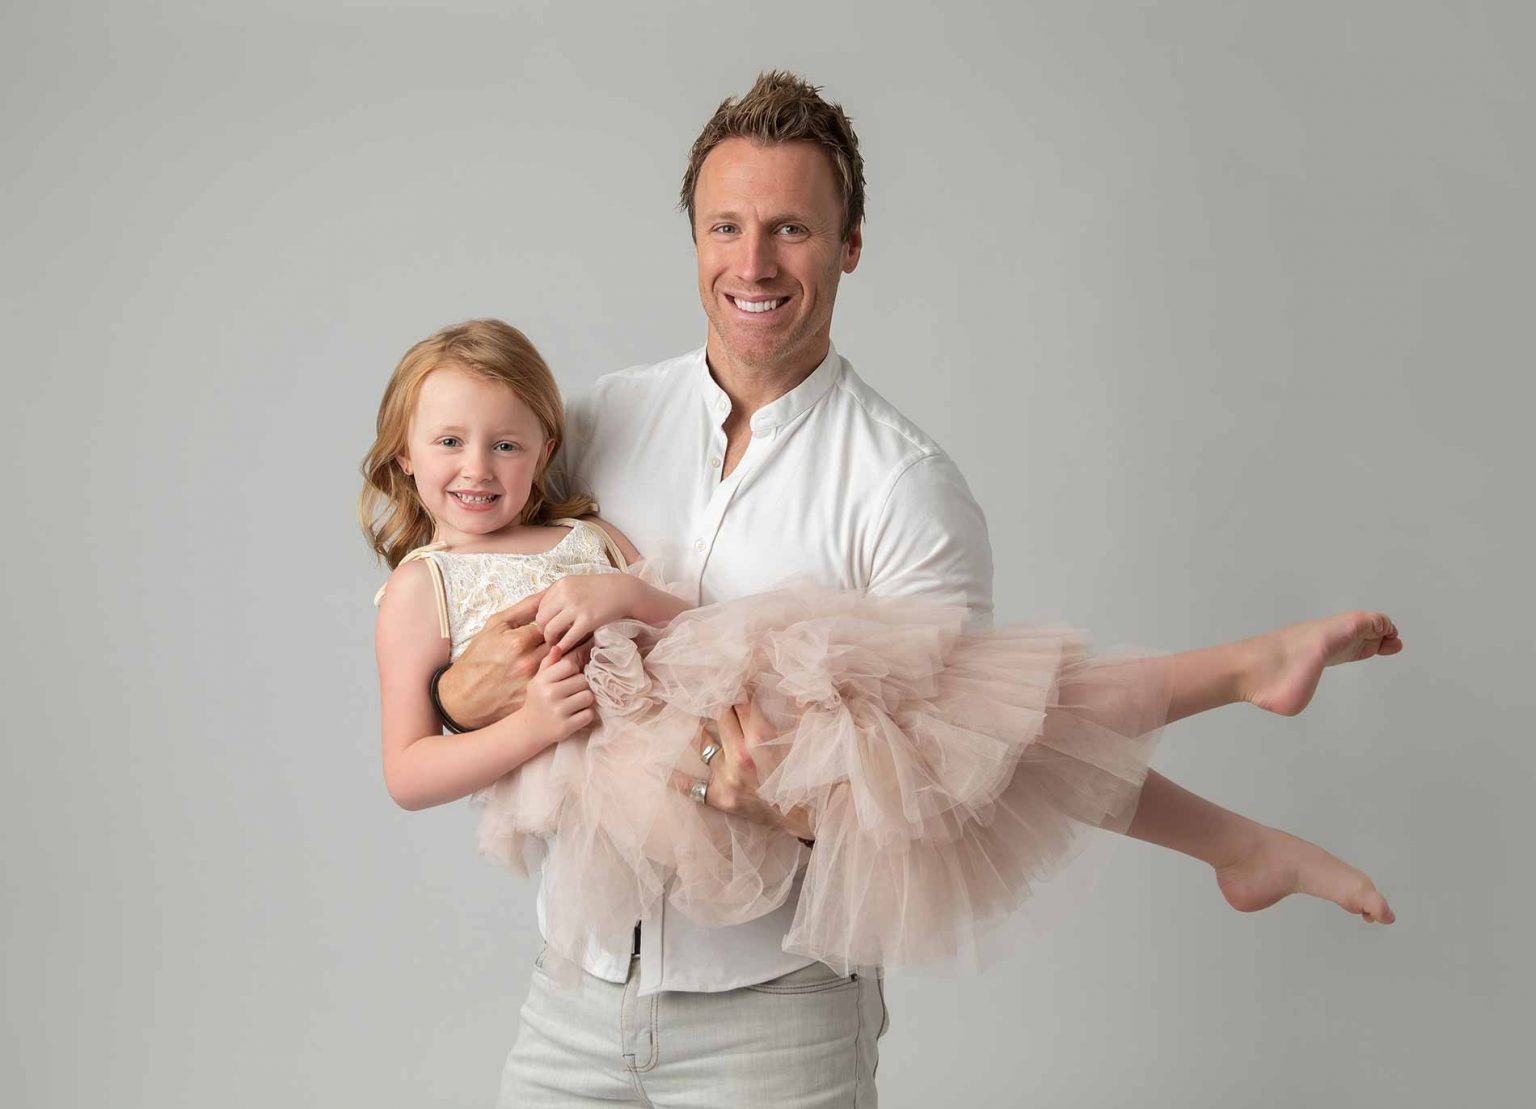 Father playfully carrying his daughter in a tutu at a NYC baby photo studio